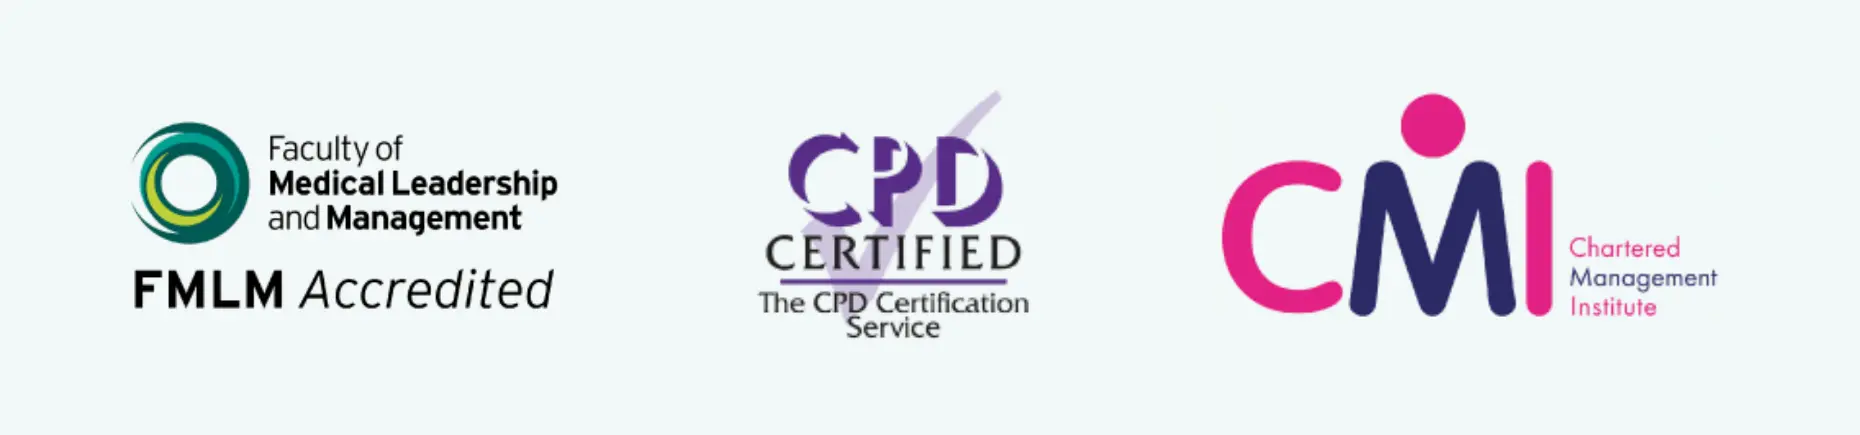 CPD Certified, FMLM Accredited, CMI